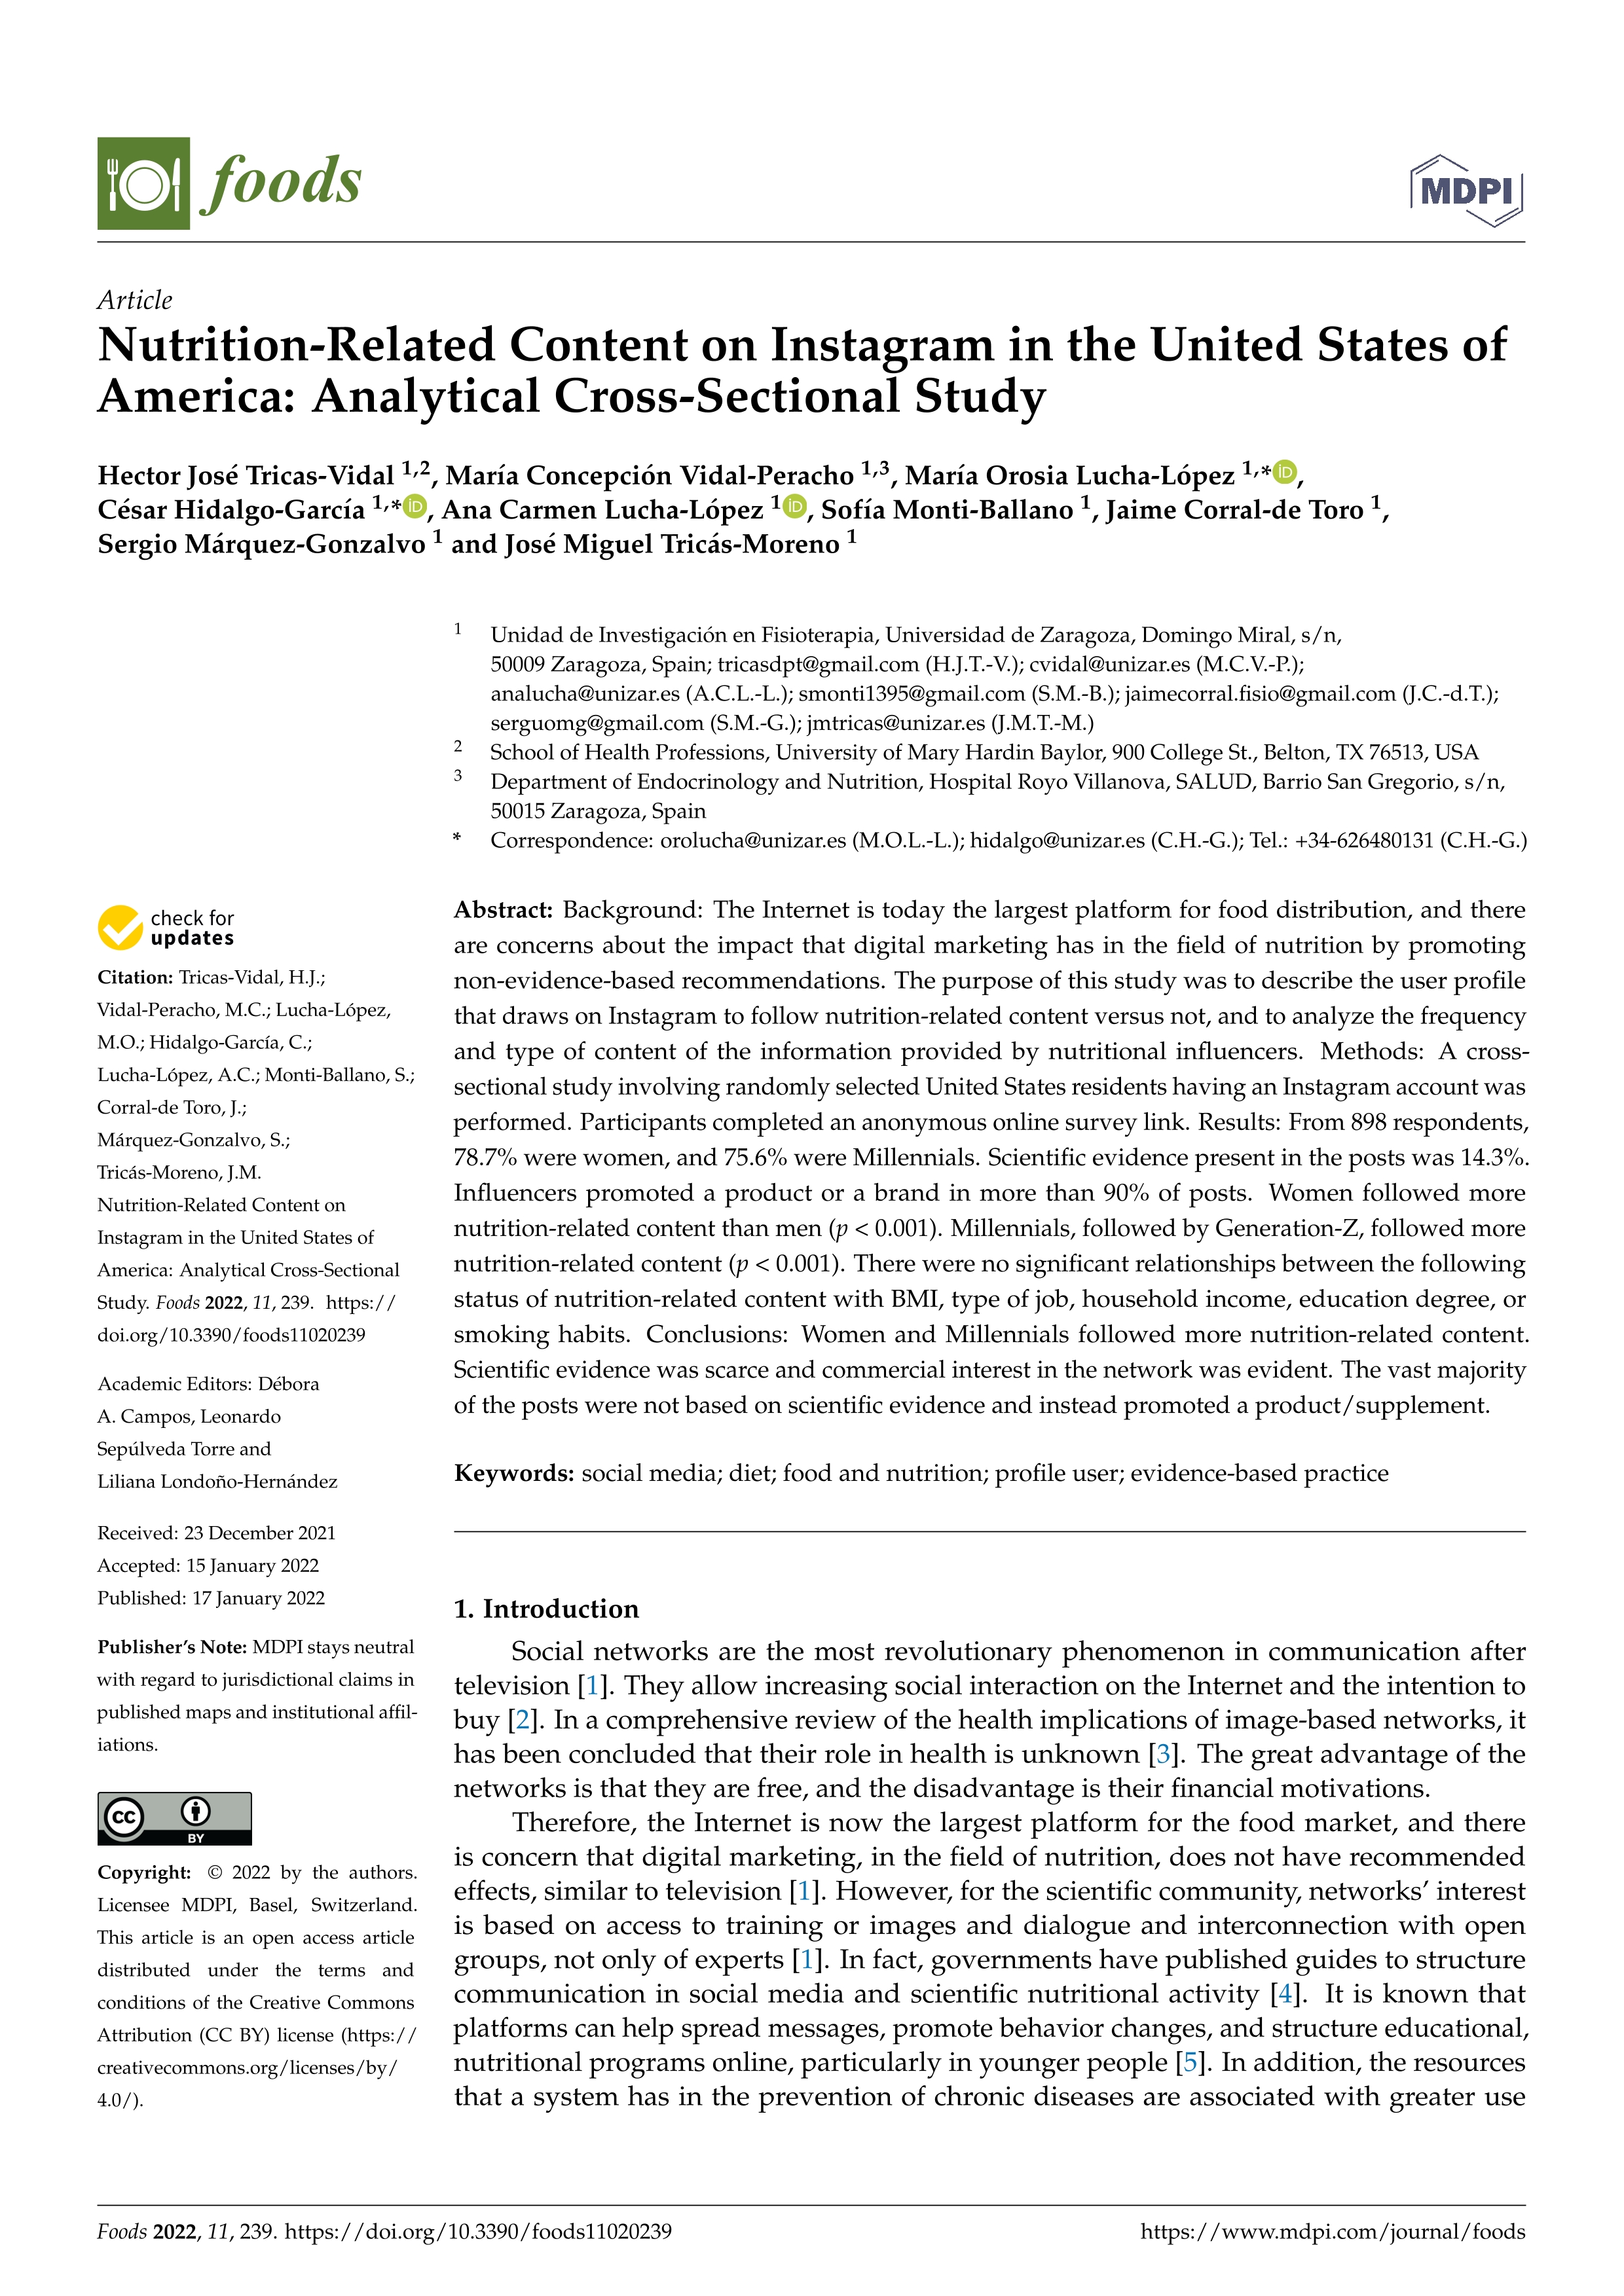 Nutrition-related content on instagram in the united states of america: analytical cross-sectional study